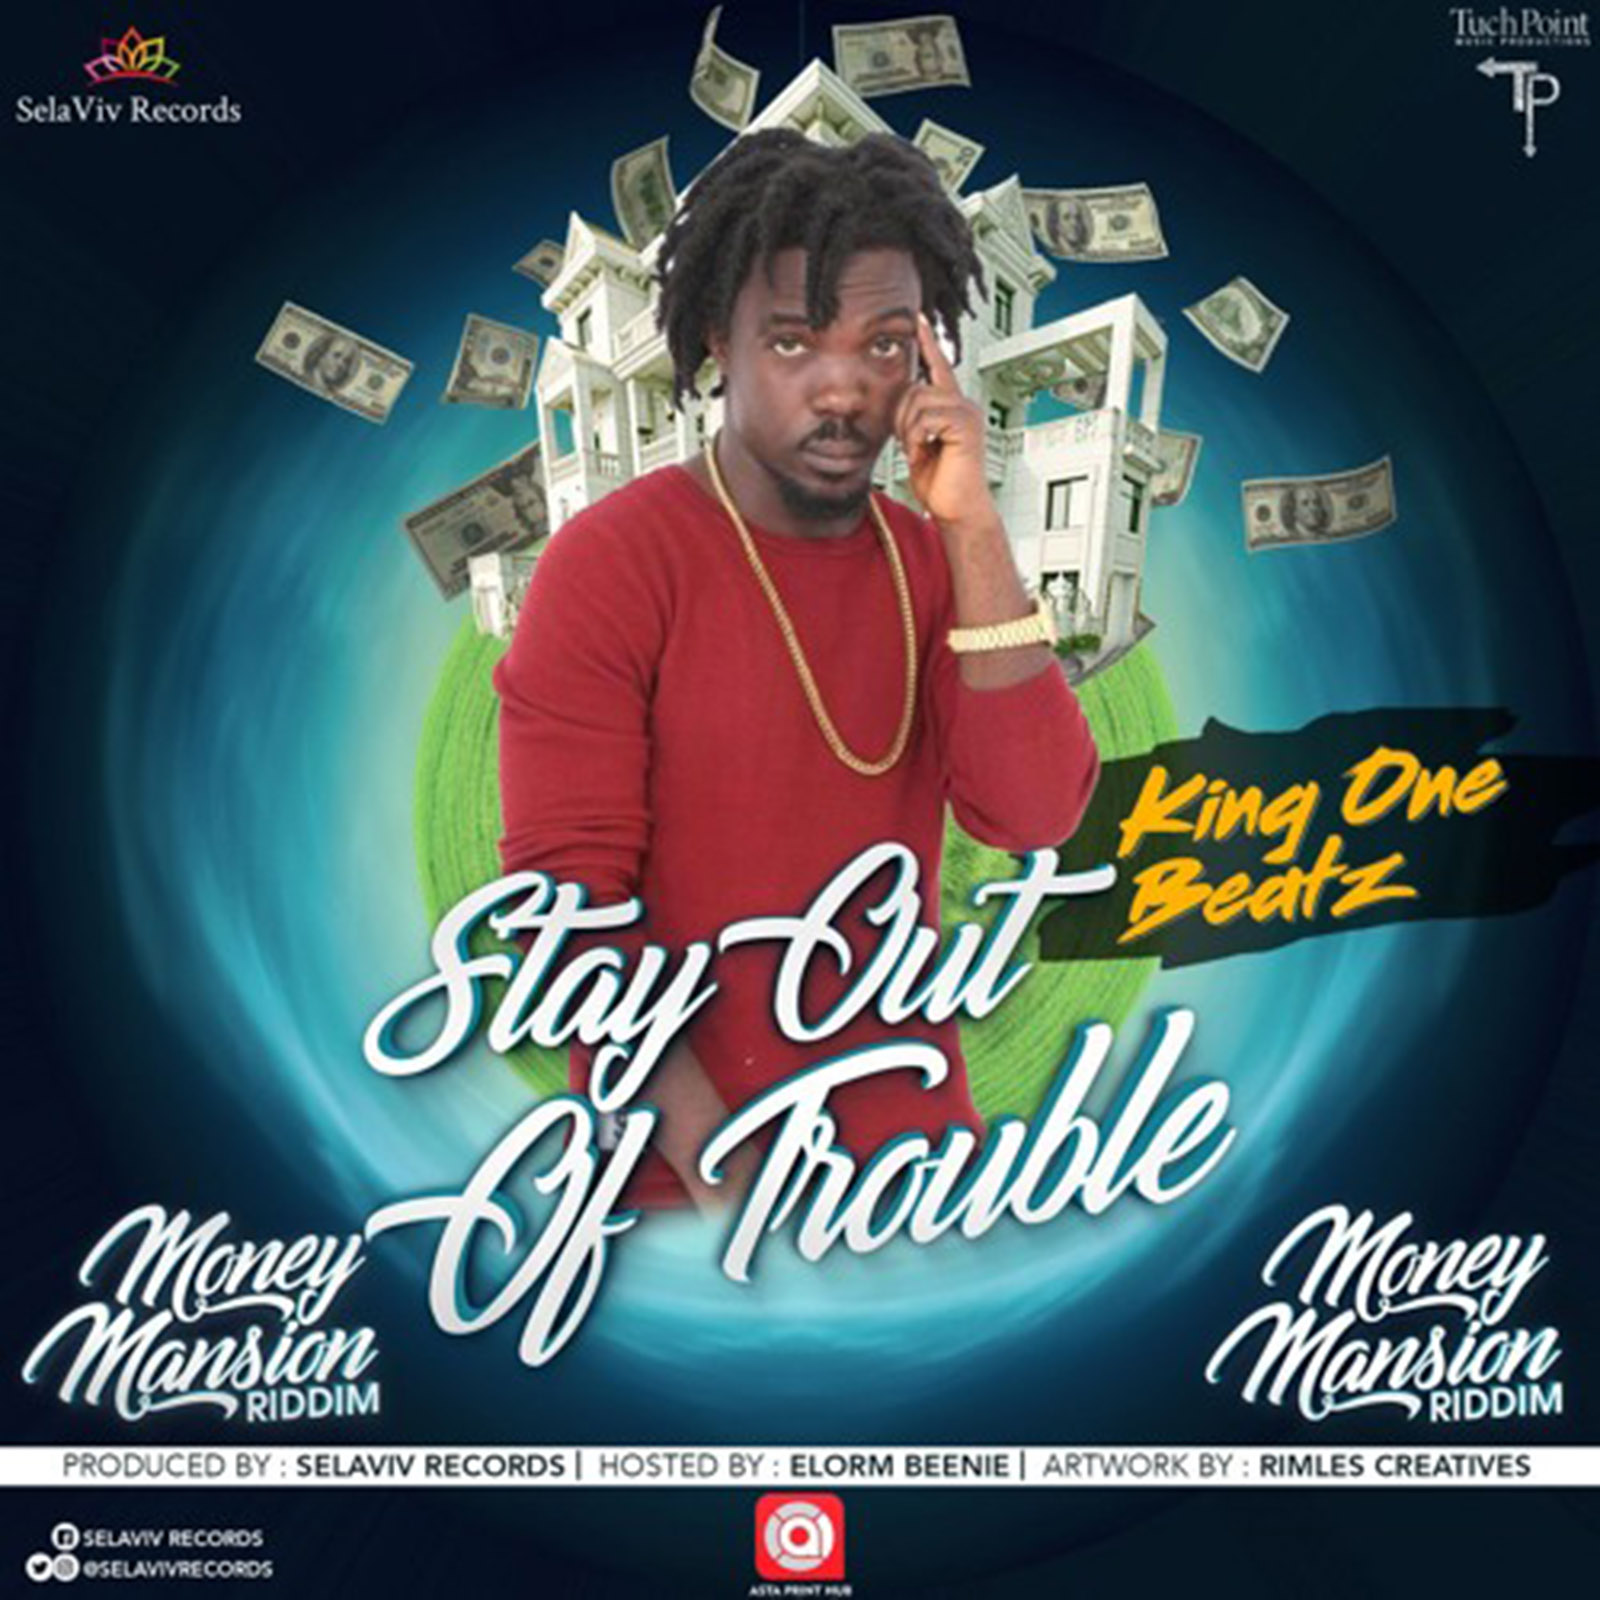 Stay Out Of Trouble (Money Mansion Riddim) by King One Beatz